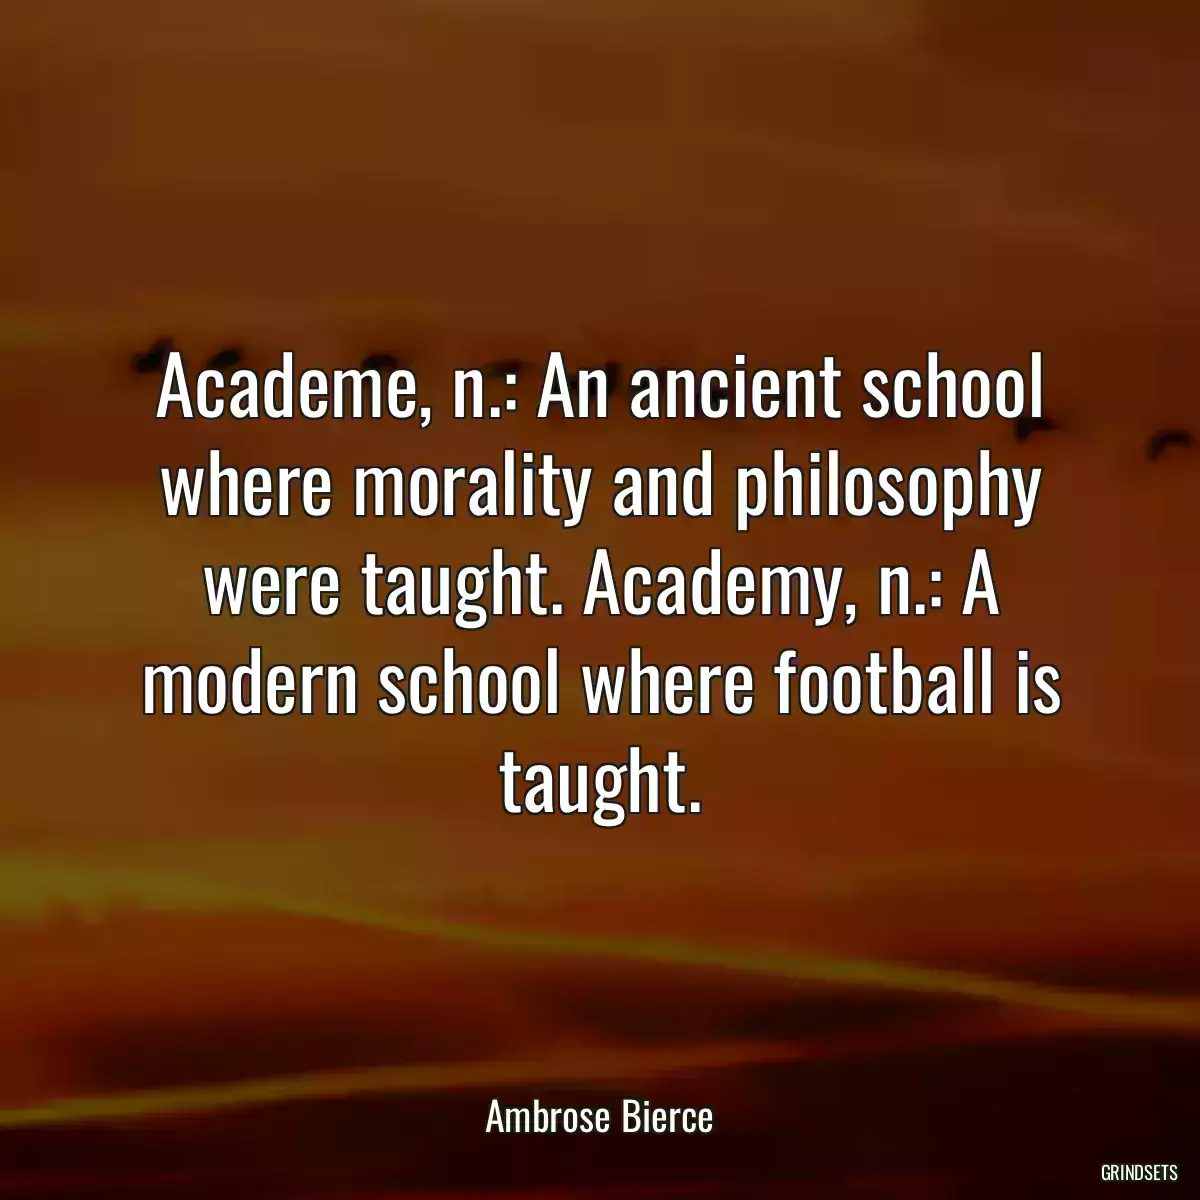 Academe, n.: An ancient school where morality and philosophy were taught. Academy, n.: A modern school where football is taught.